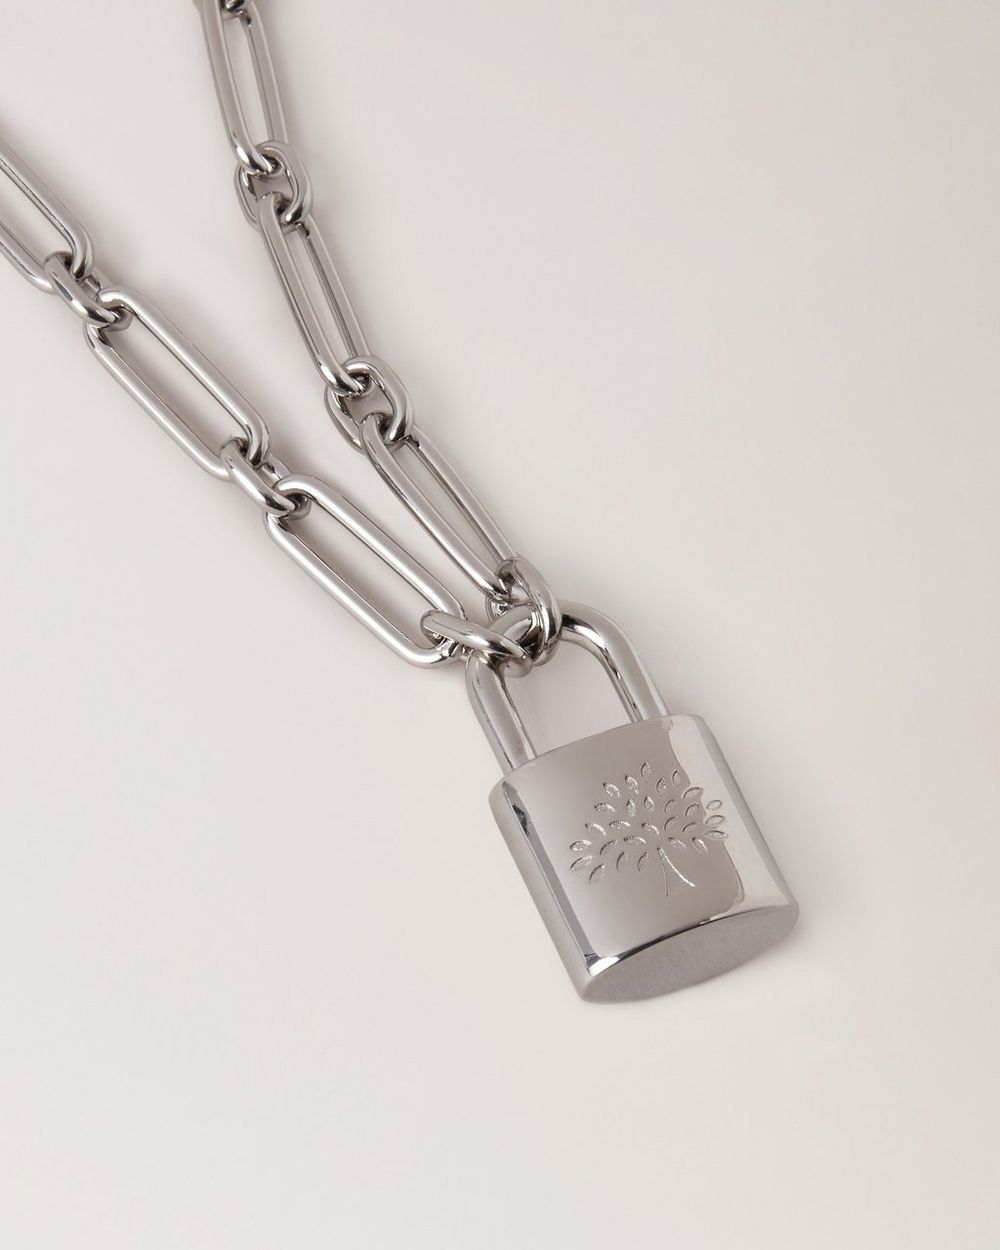 Small Sterling Silver Padlock Necklace, 100% Sterling Silver